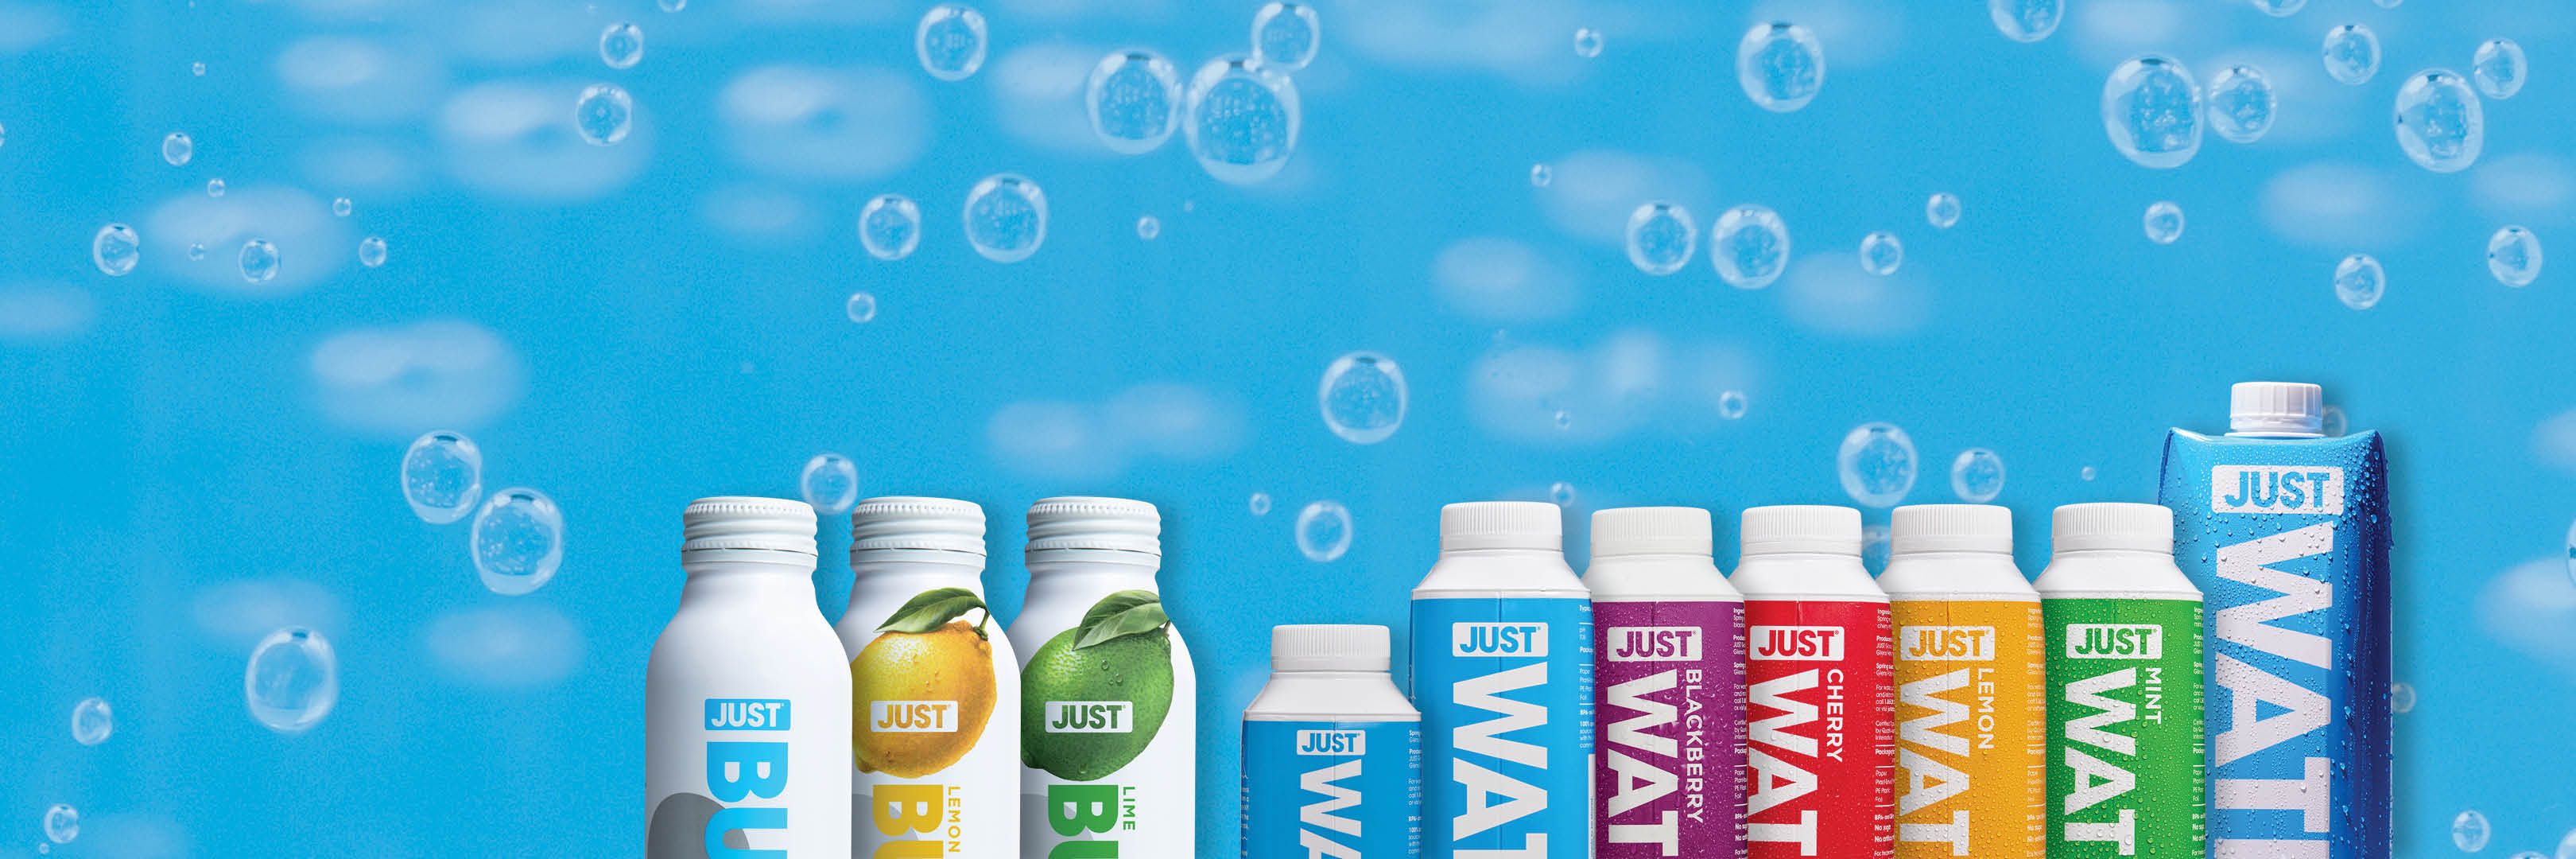 JUST WATER MULTIPLE FLAVOR COLLECTION BANNER